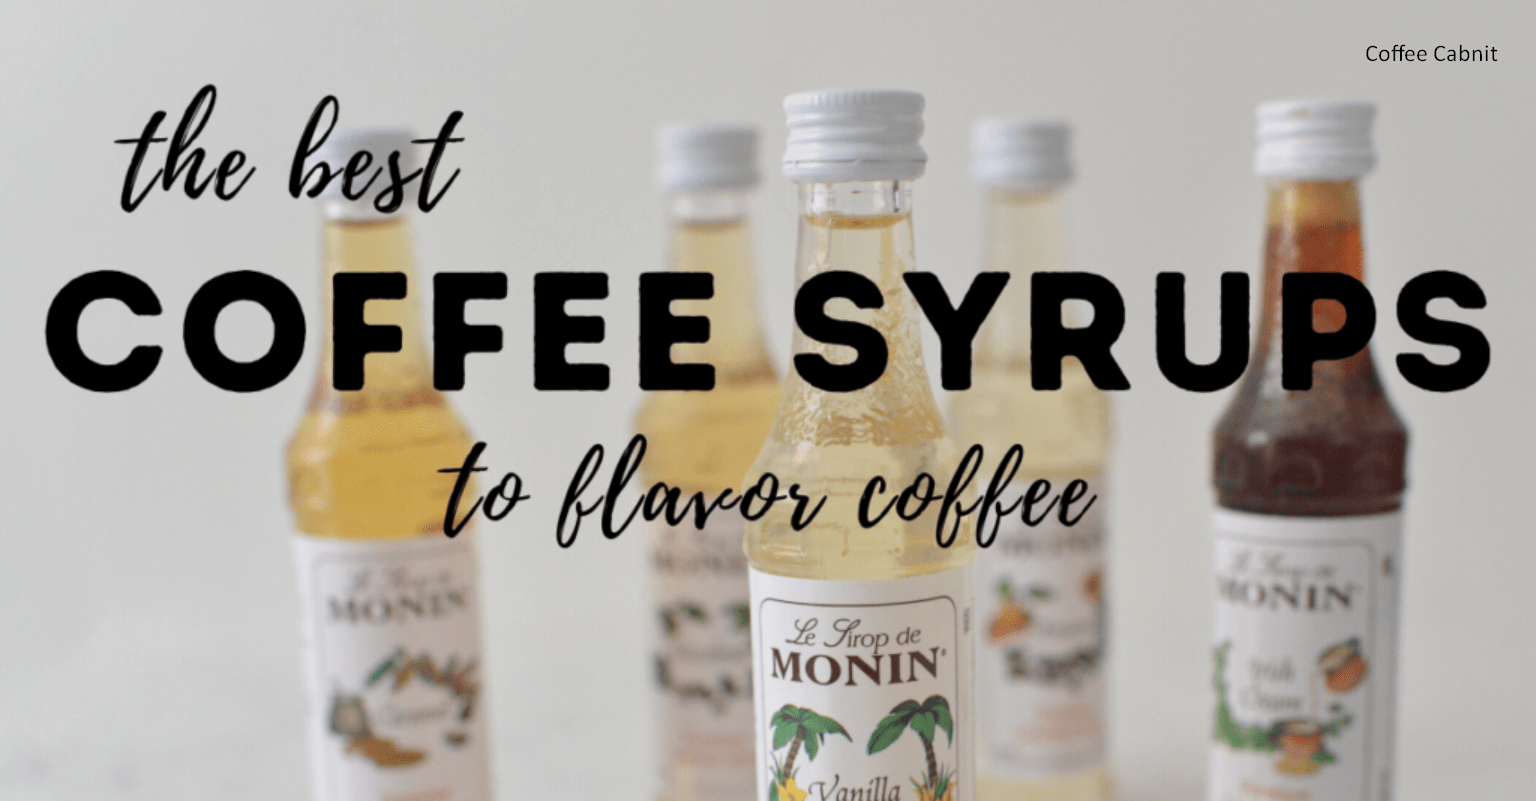 Making Your Coffee Syrups: A Creative and Flavourful Endeavor